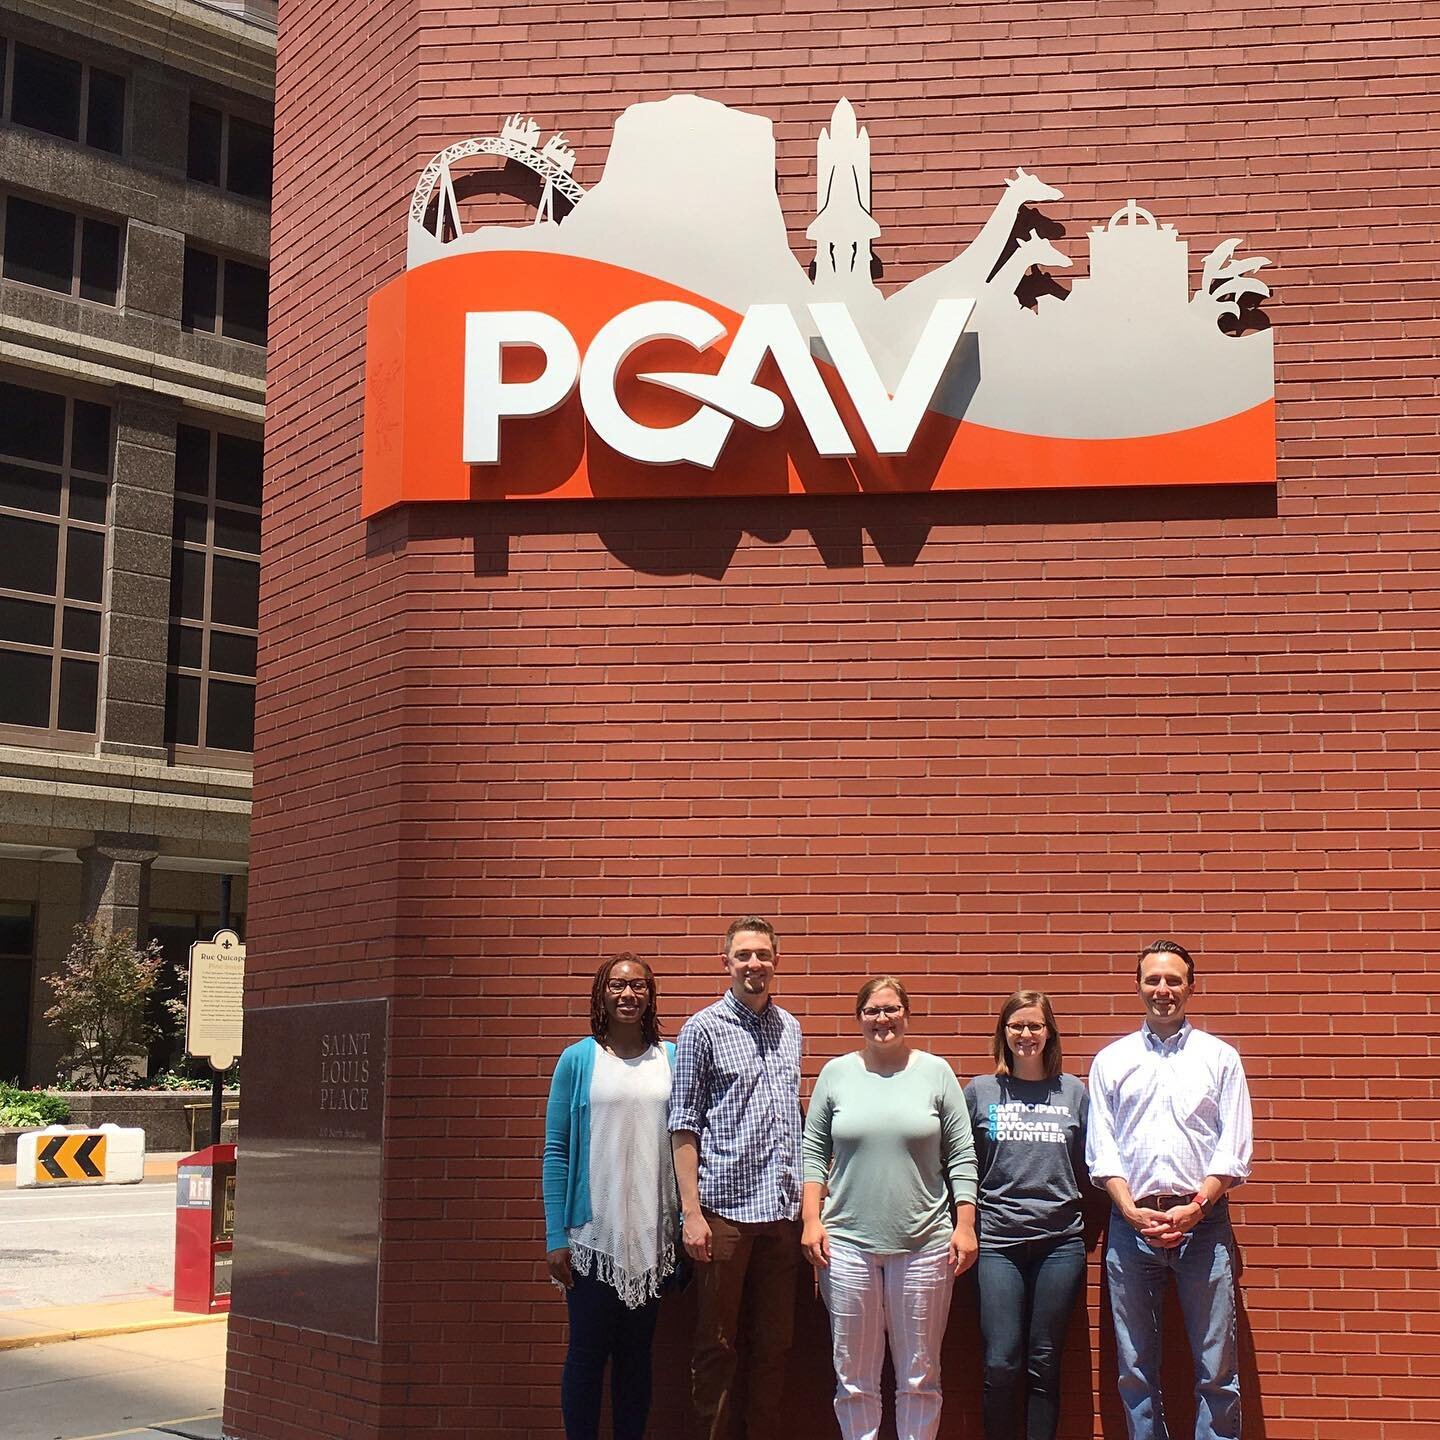 When you get caught under the #PGAV sign by @melissariveratorres, it means it&rsquo;s team photo time! 📸 

Thankful for sunny days and the new @saltandsmokebbq location in @downtownstlouis! #STL